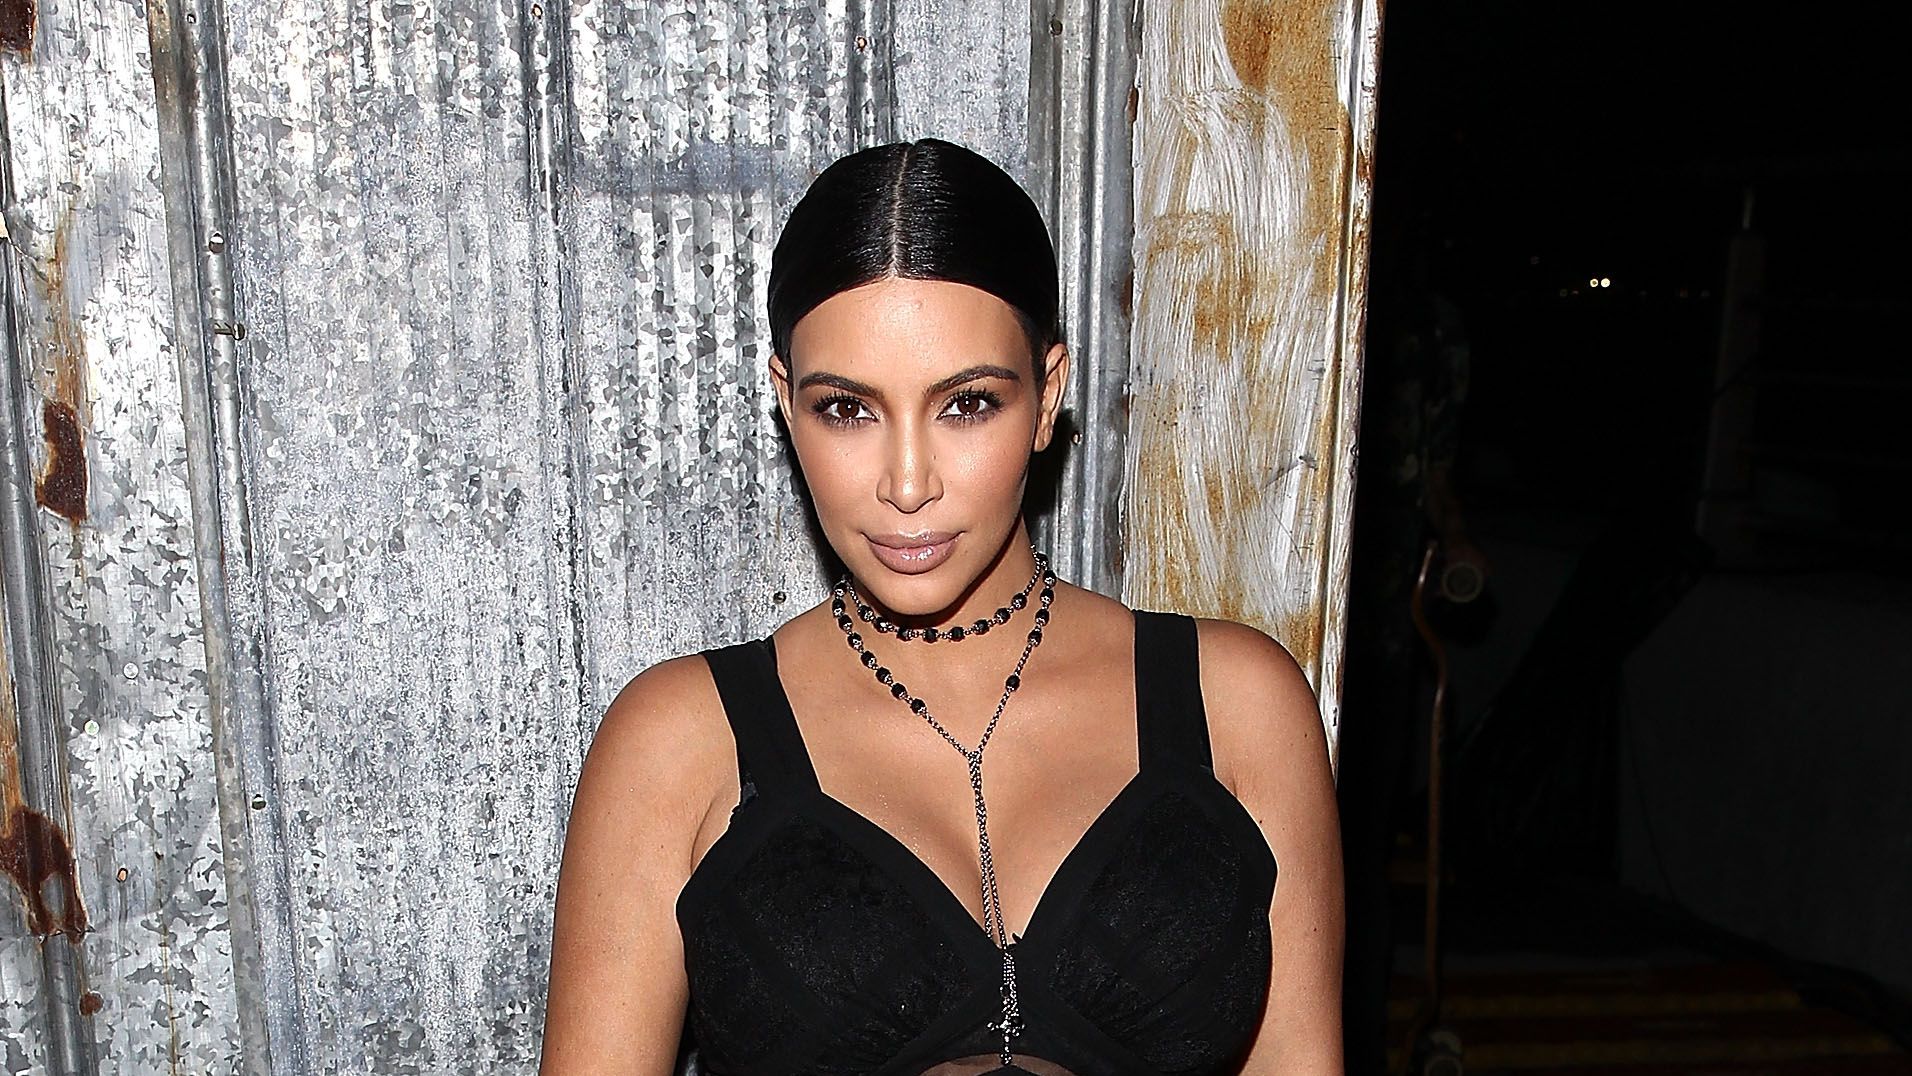 Want Kim Kardashian's Perfect Contour? Here Are The Exact Products She Uses